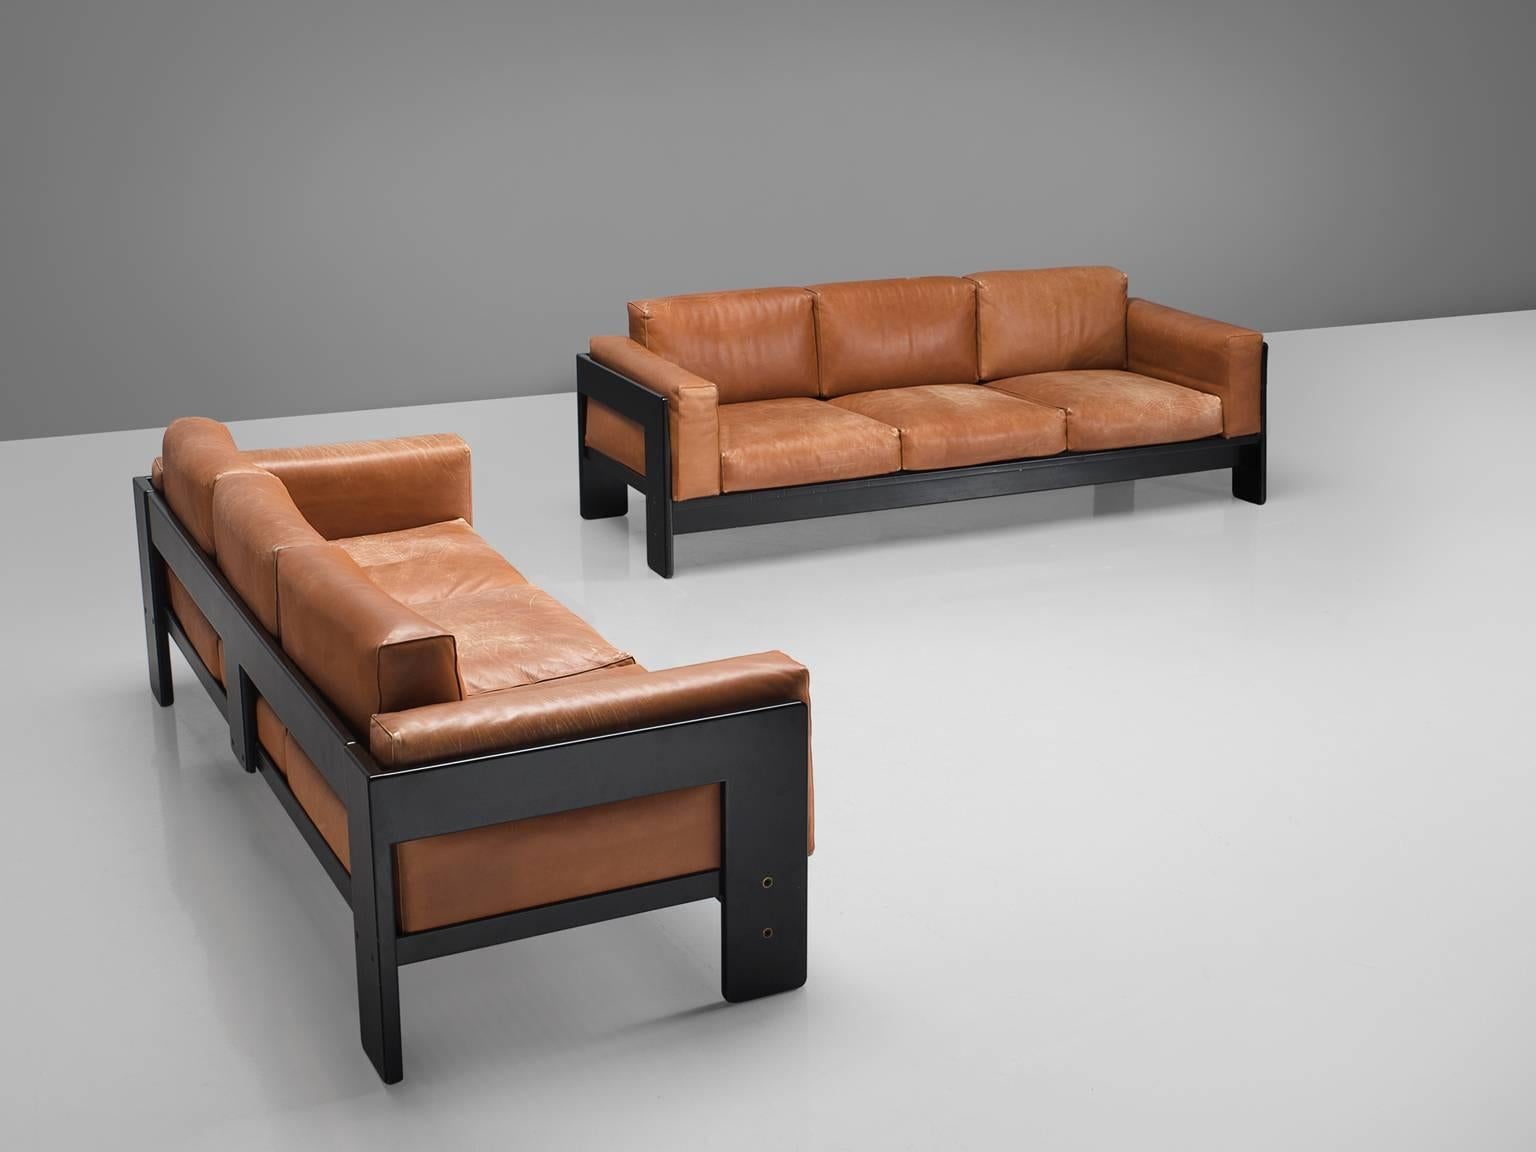 Tobia Scarpa for Knoll, 'Bastiano' sofas, leather, wood, Italy, design 1962, 1990 production.

This pair of Bastiano sofas is designed by Tobia Scarpa in 1962. The three-seat features thick brick red leather and a stained dark wooden basket frame.